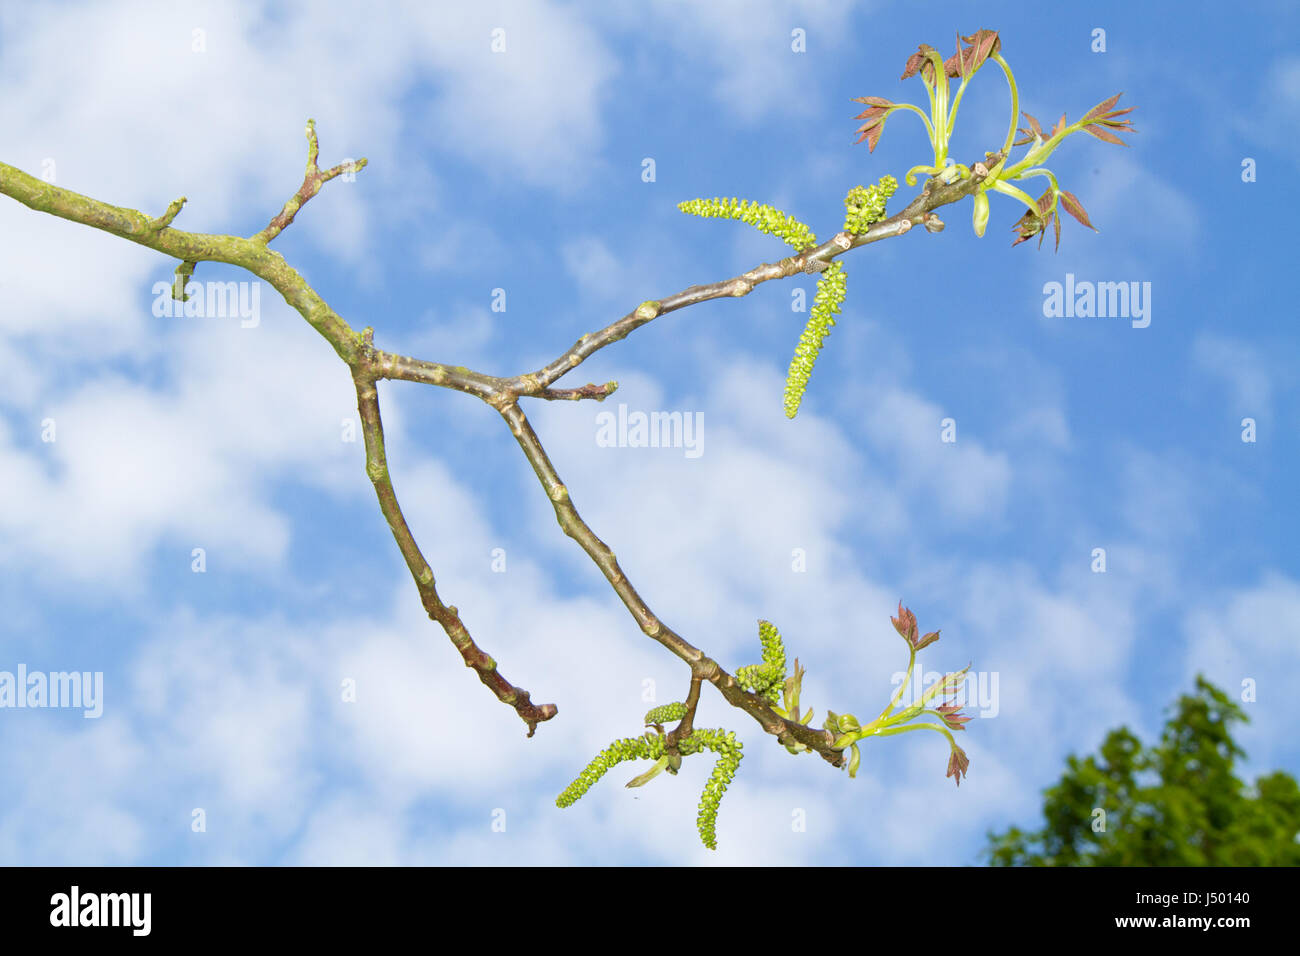 Catkins and unfolding leaves of a Walnut tree in spring. Stock Photo